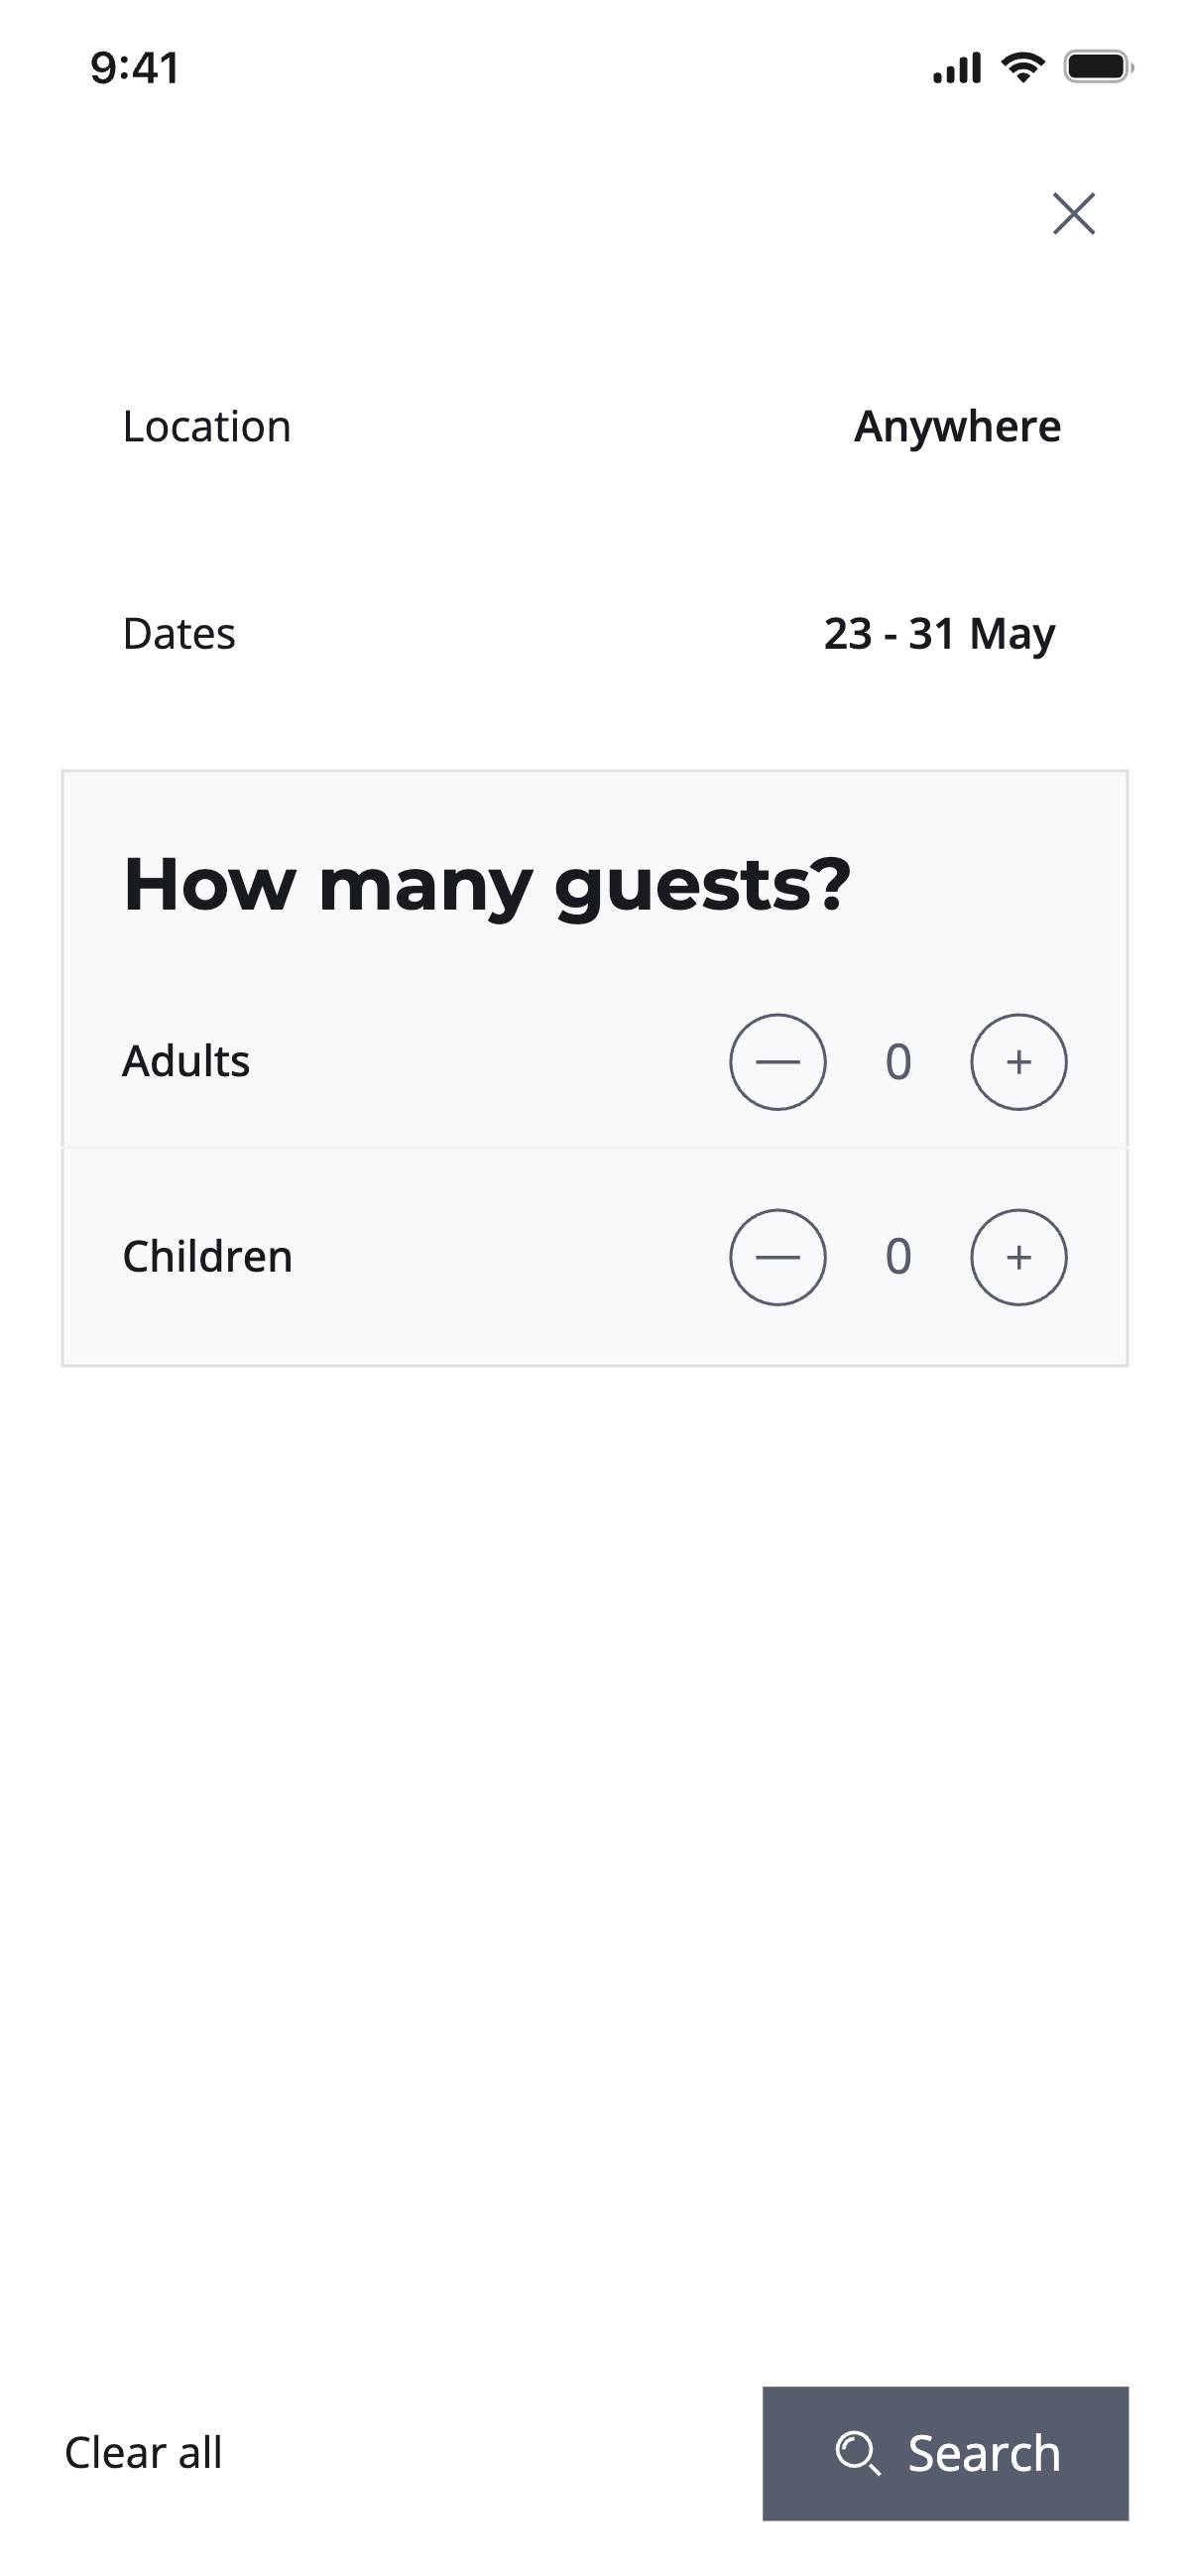 Search - Add guests